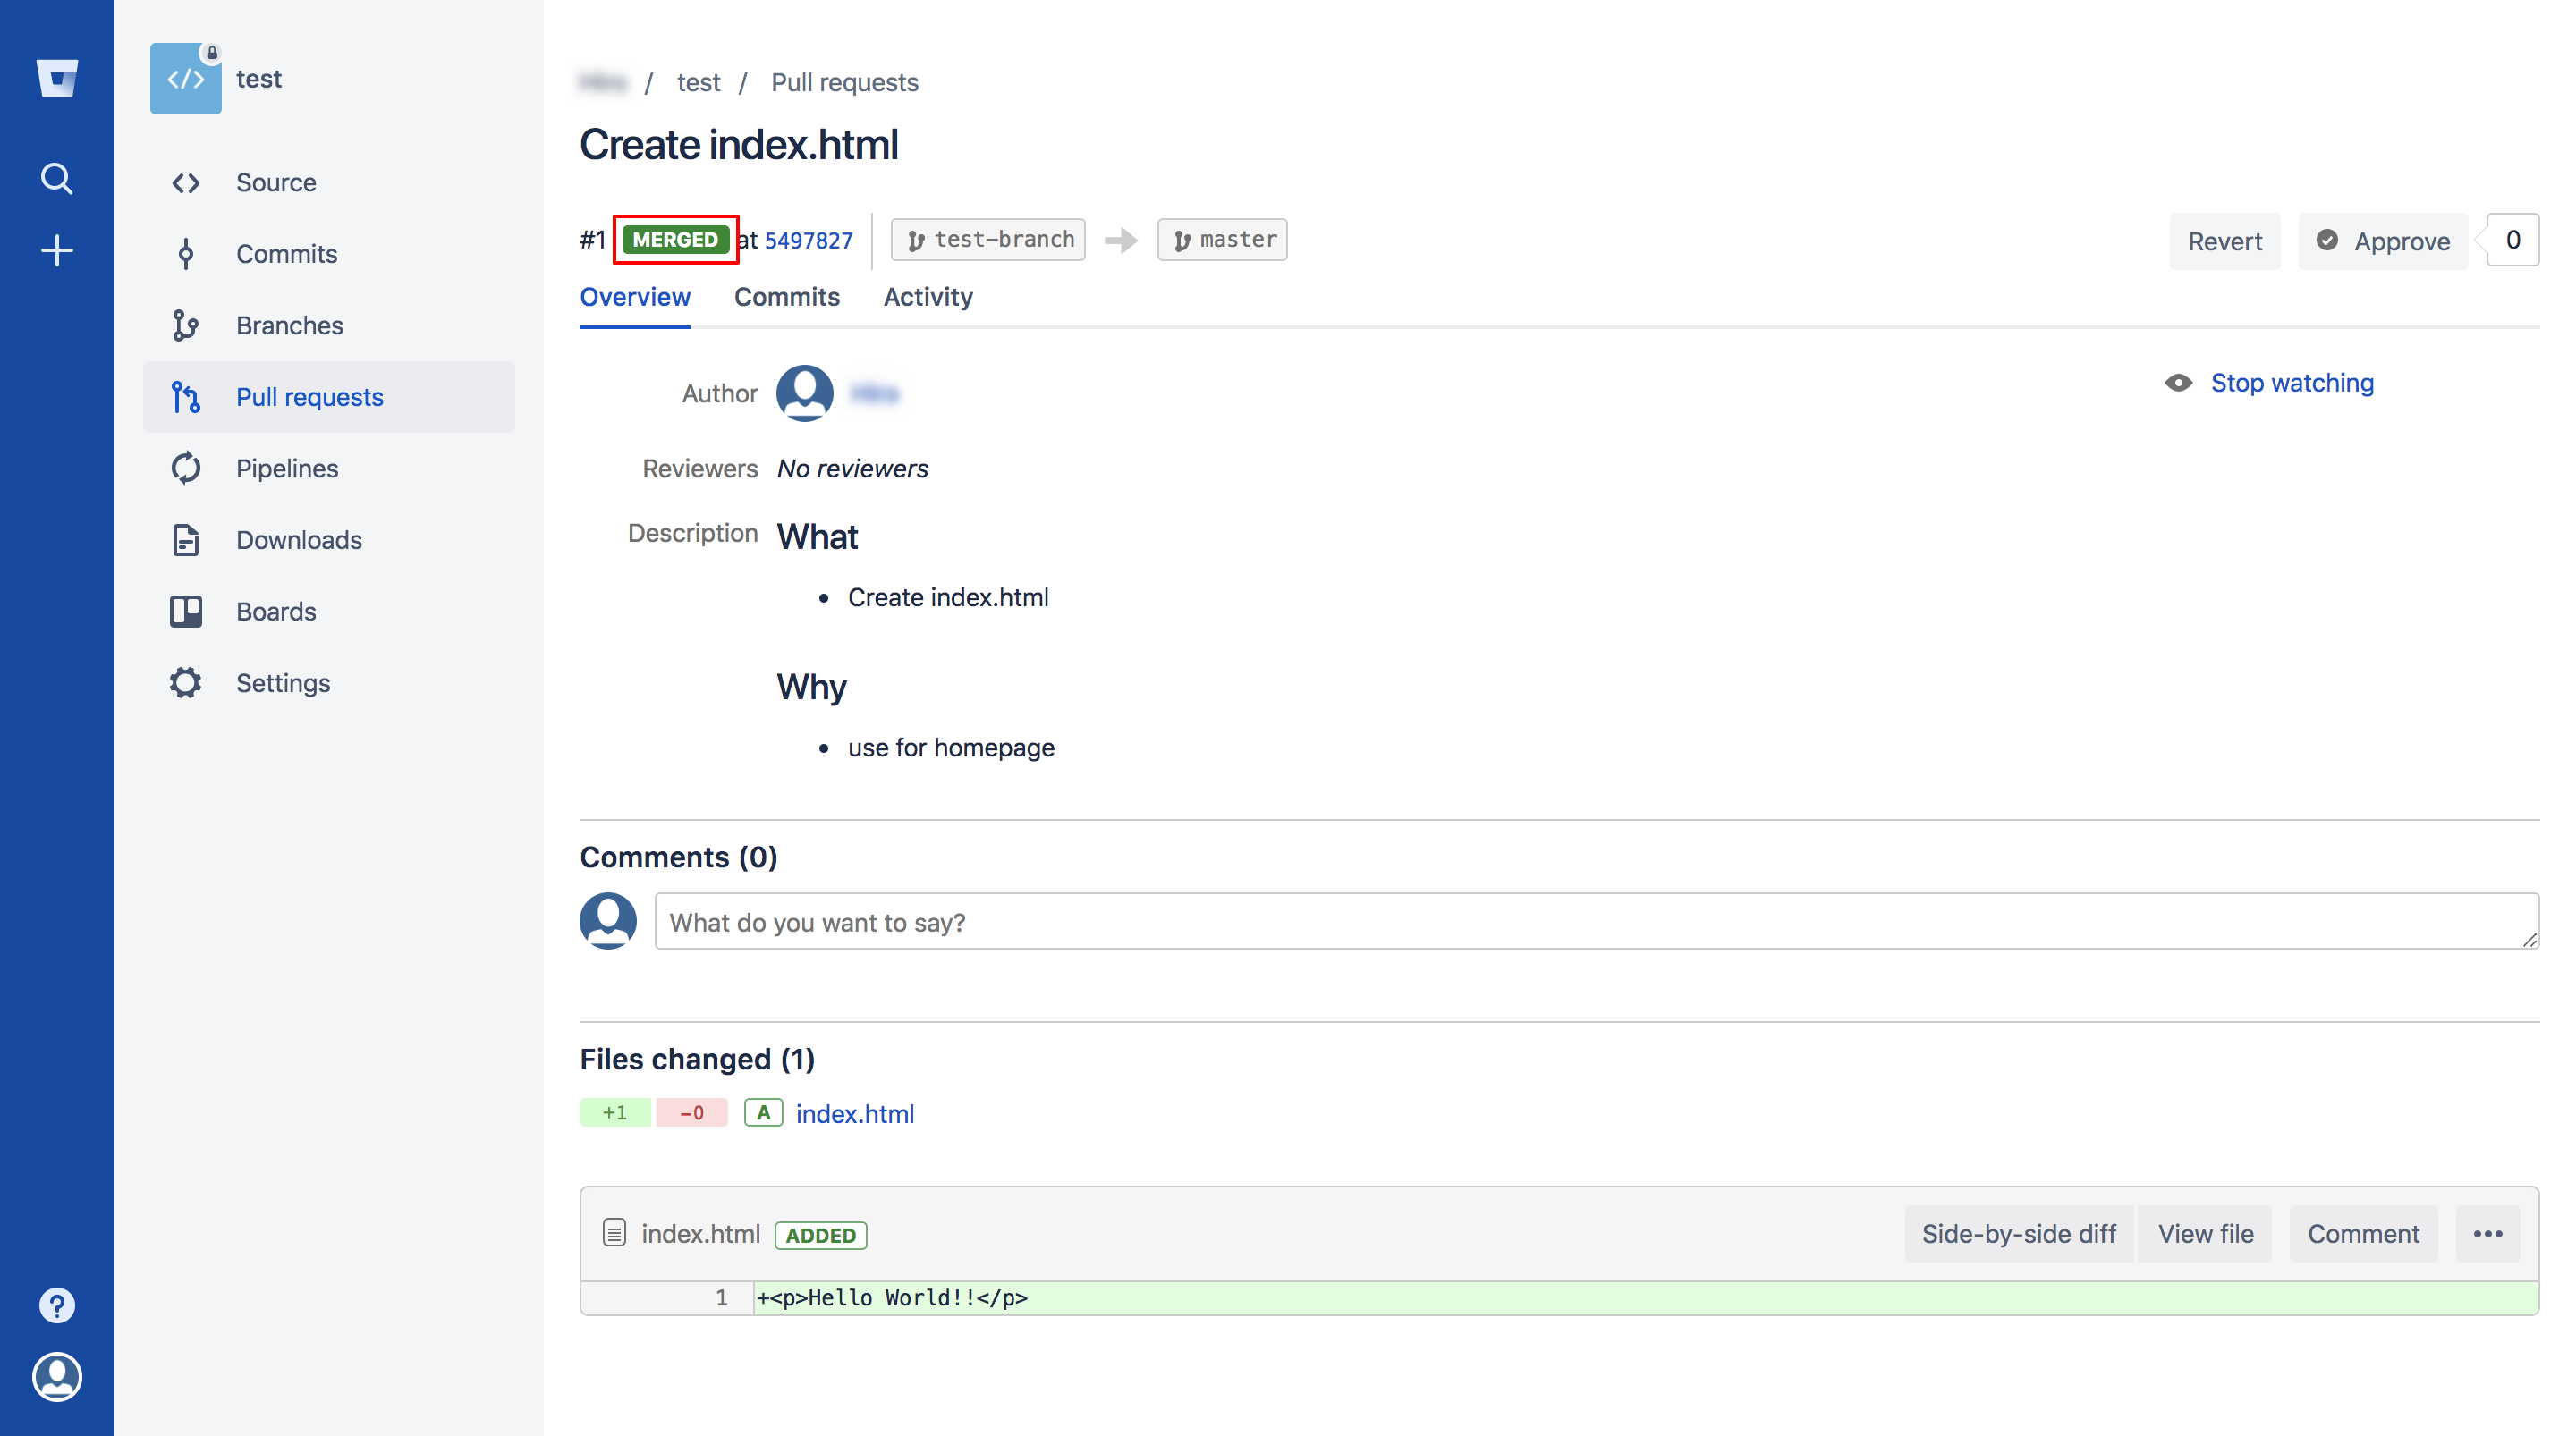 nago3   test   Pull request  1  Create index html — Bitbucket (2).png